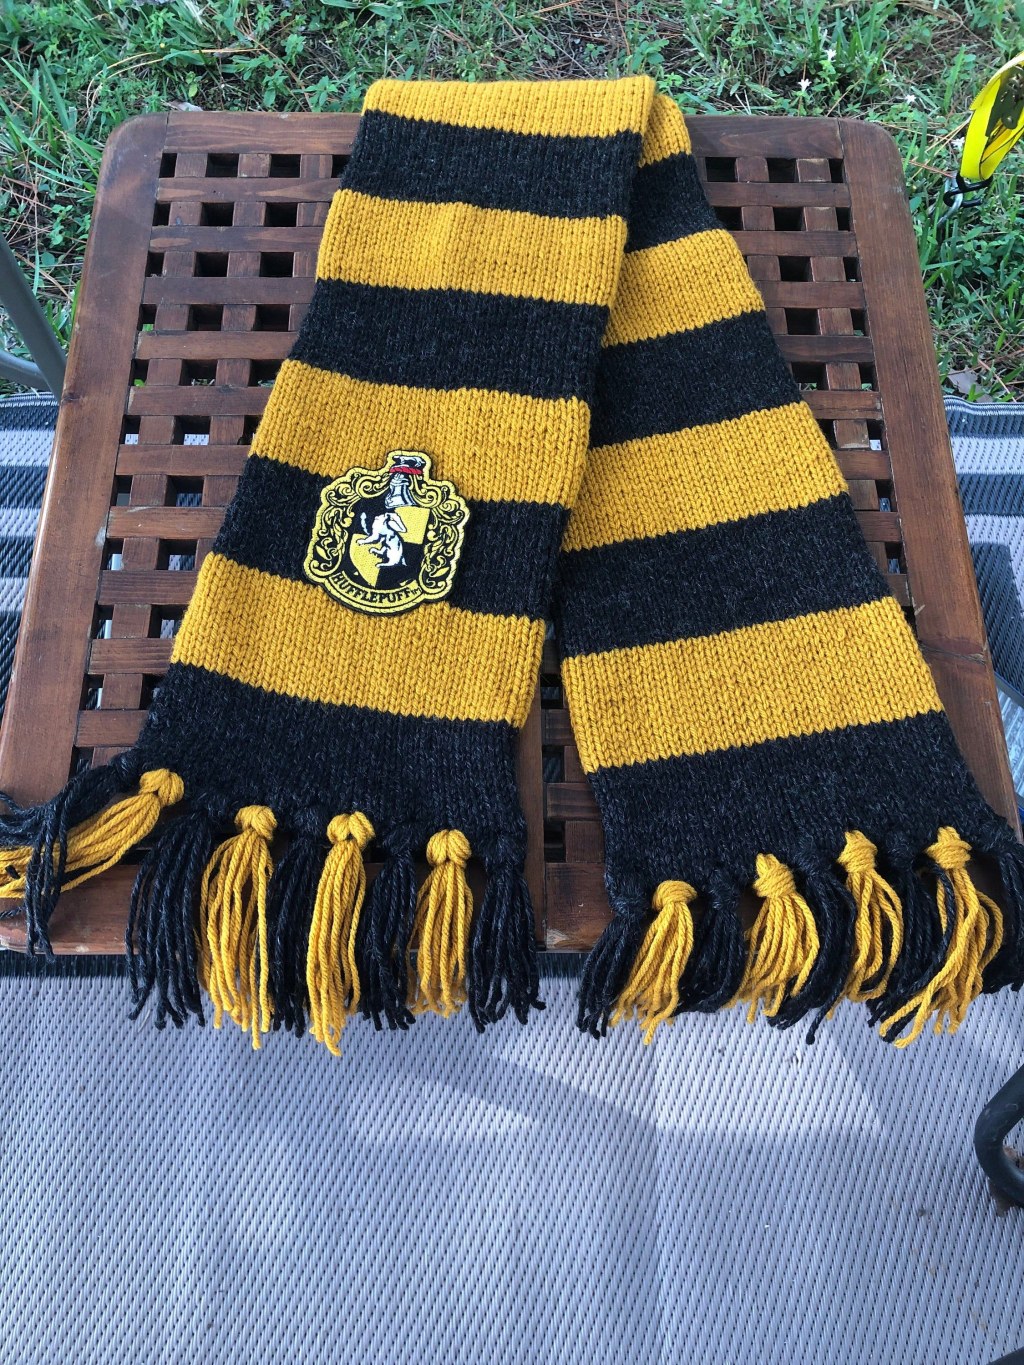 Picture of: Harry Potter Hufflepuff Scarf by mbguest on Etsy  Harry potter